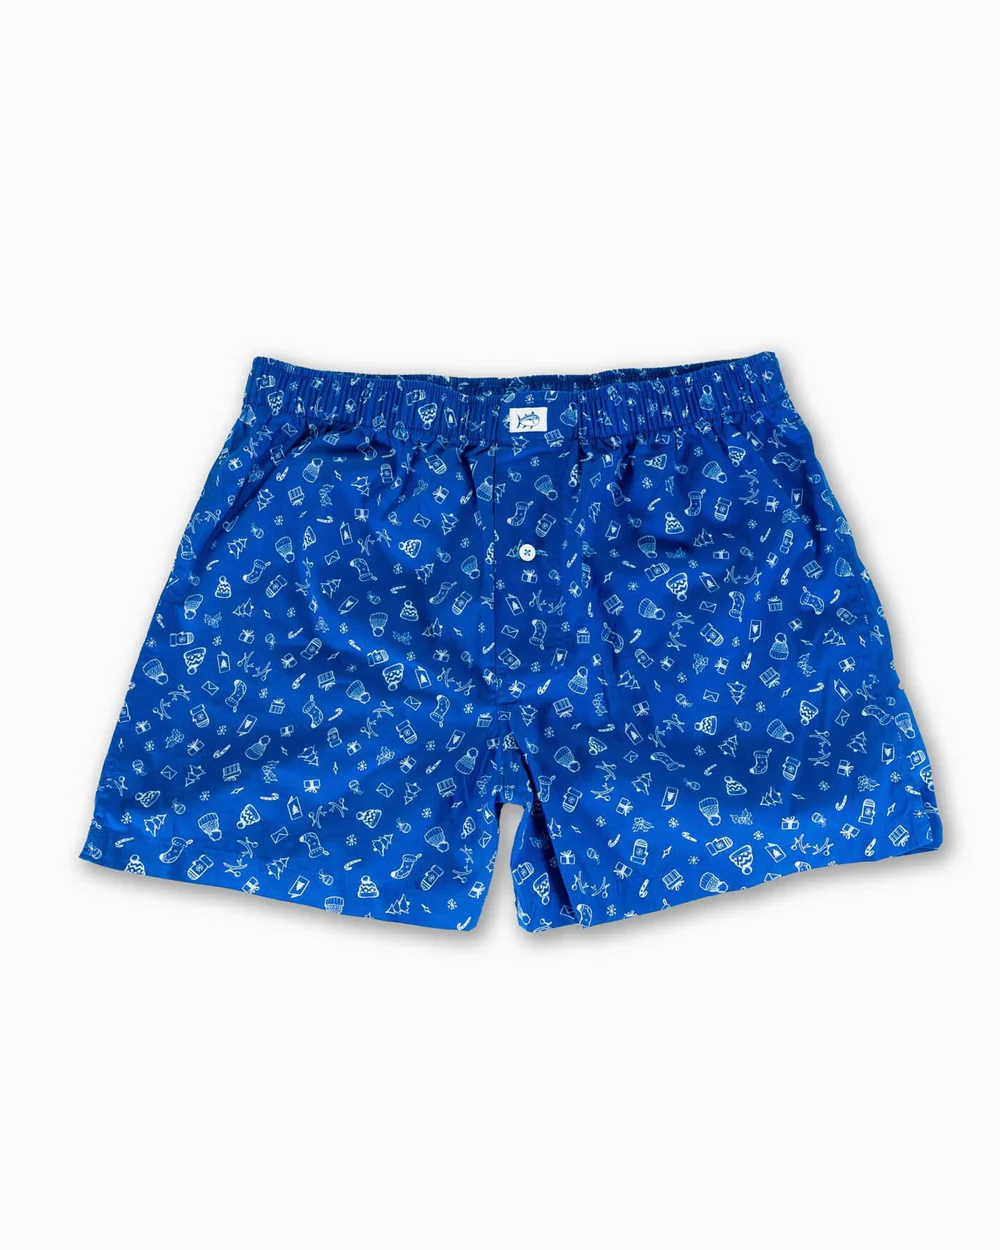 Southern Tide Men's Good Chemis-tree Boxers - Andy Thornal Company